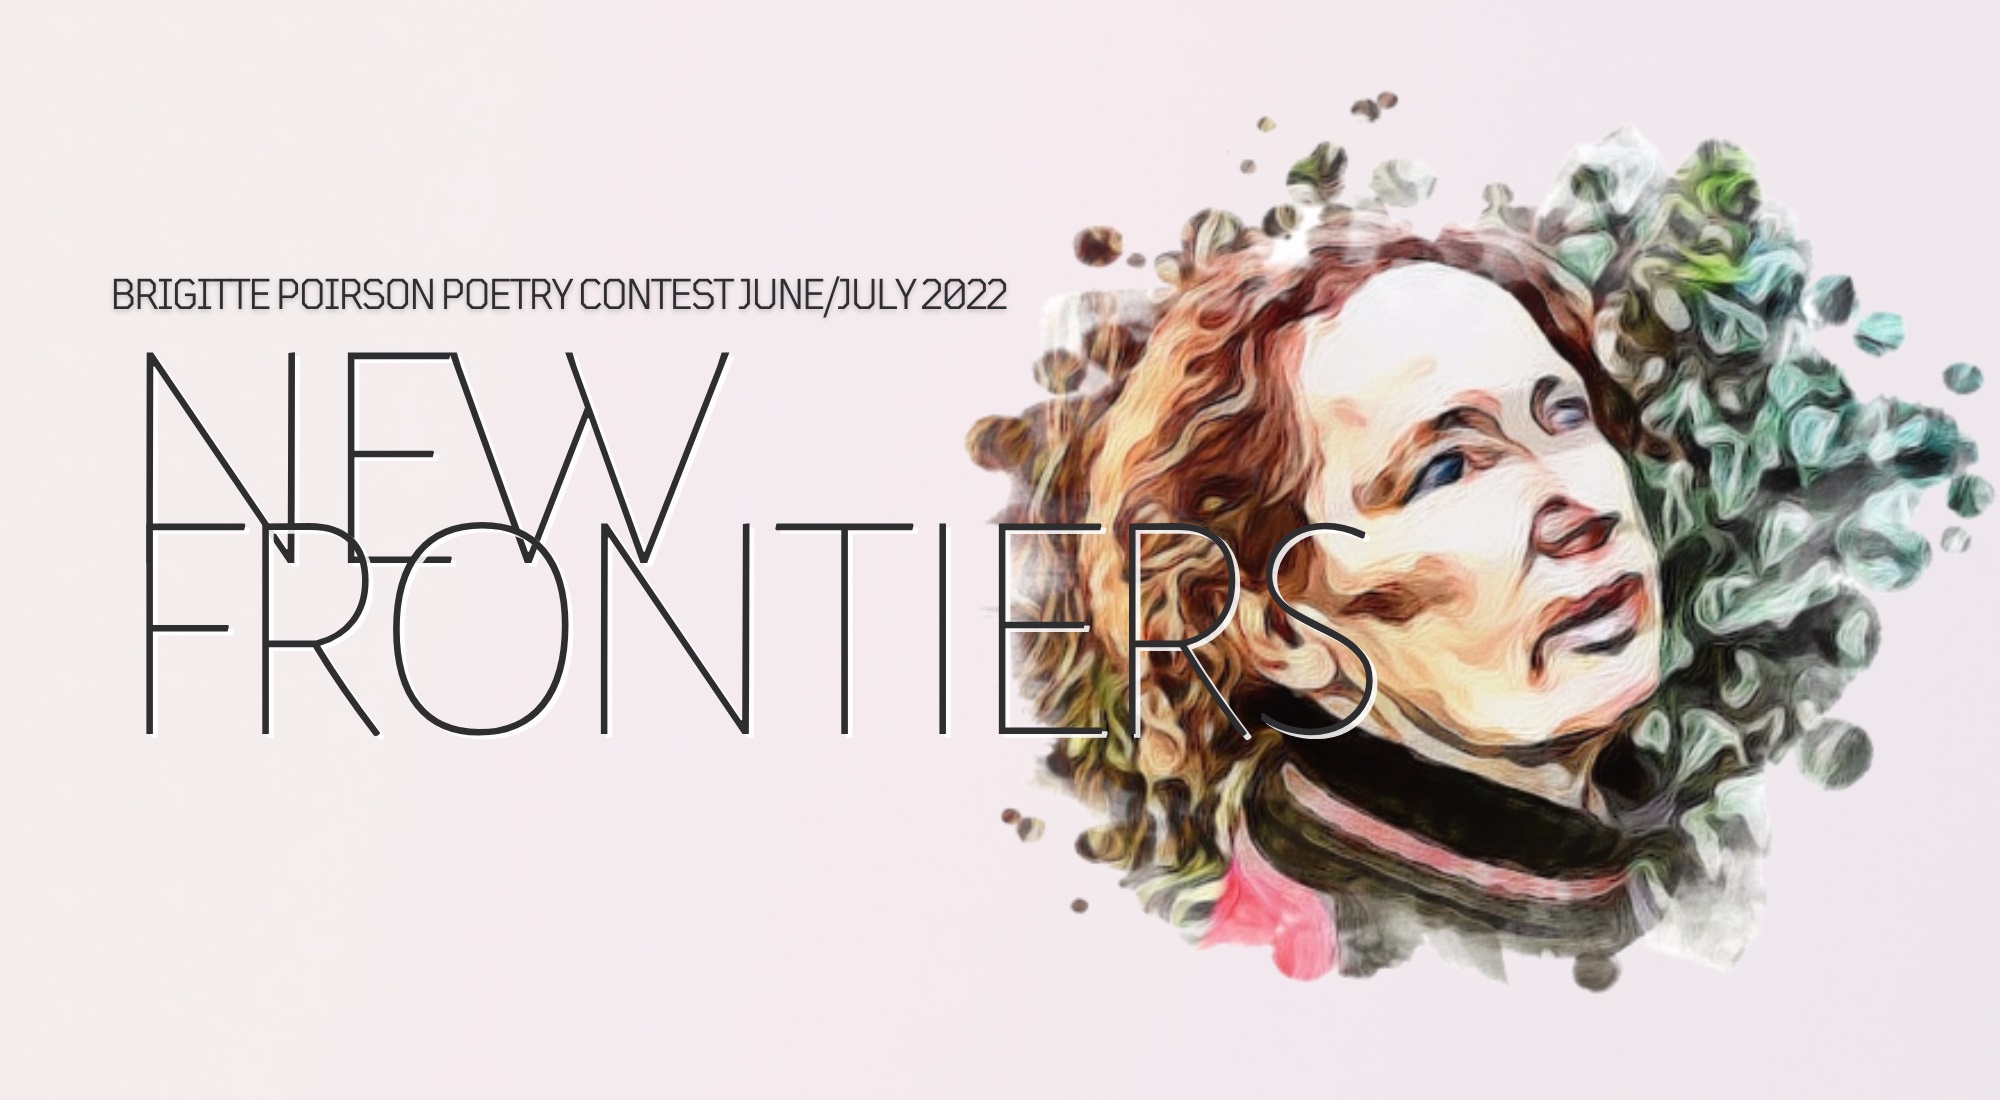 CALL FOR SUBMISSIONS: BRIGITTE POIRSON POETRY CONTEST (JUNE/JULY 2022) – ‘YOUR NEW FRONTIER’